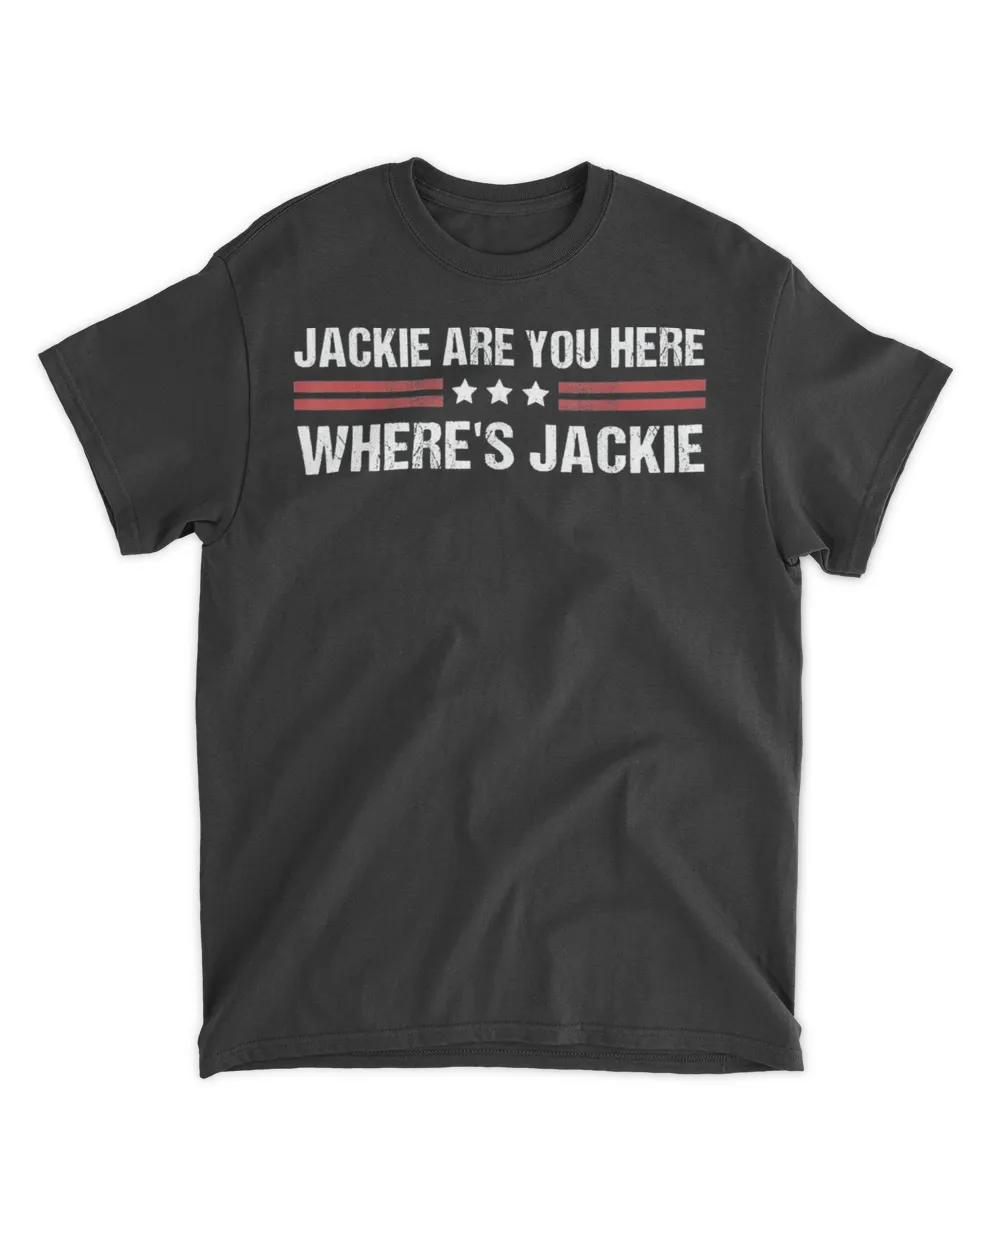 Jackie are you here where's jackie Biden quote antI Biden shirt